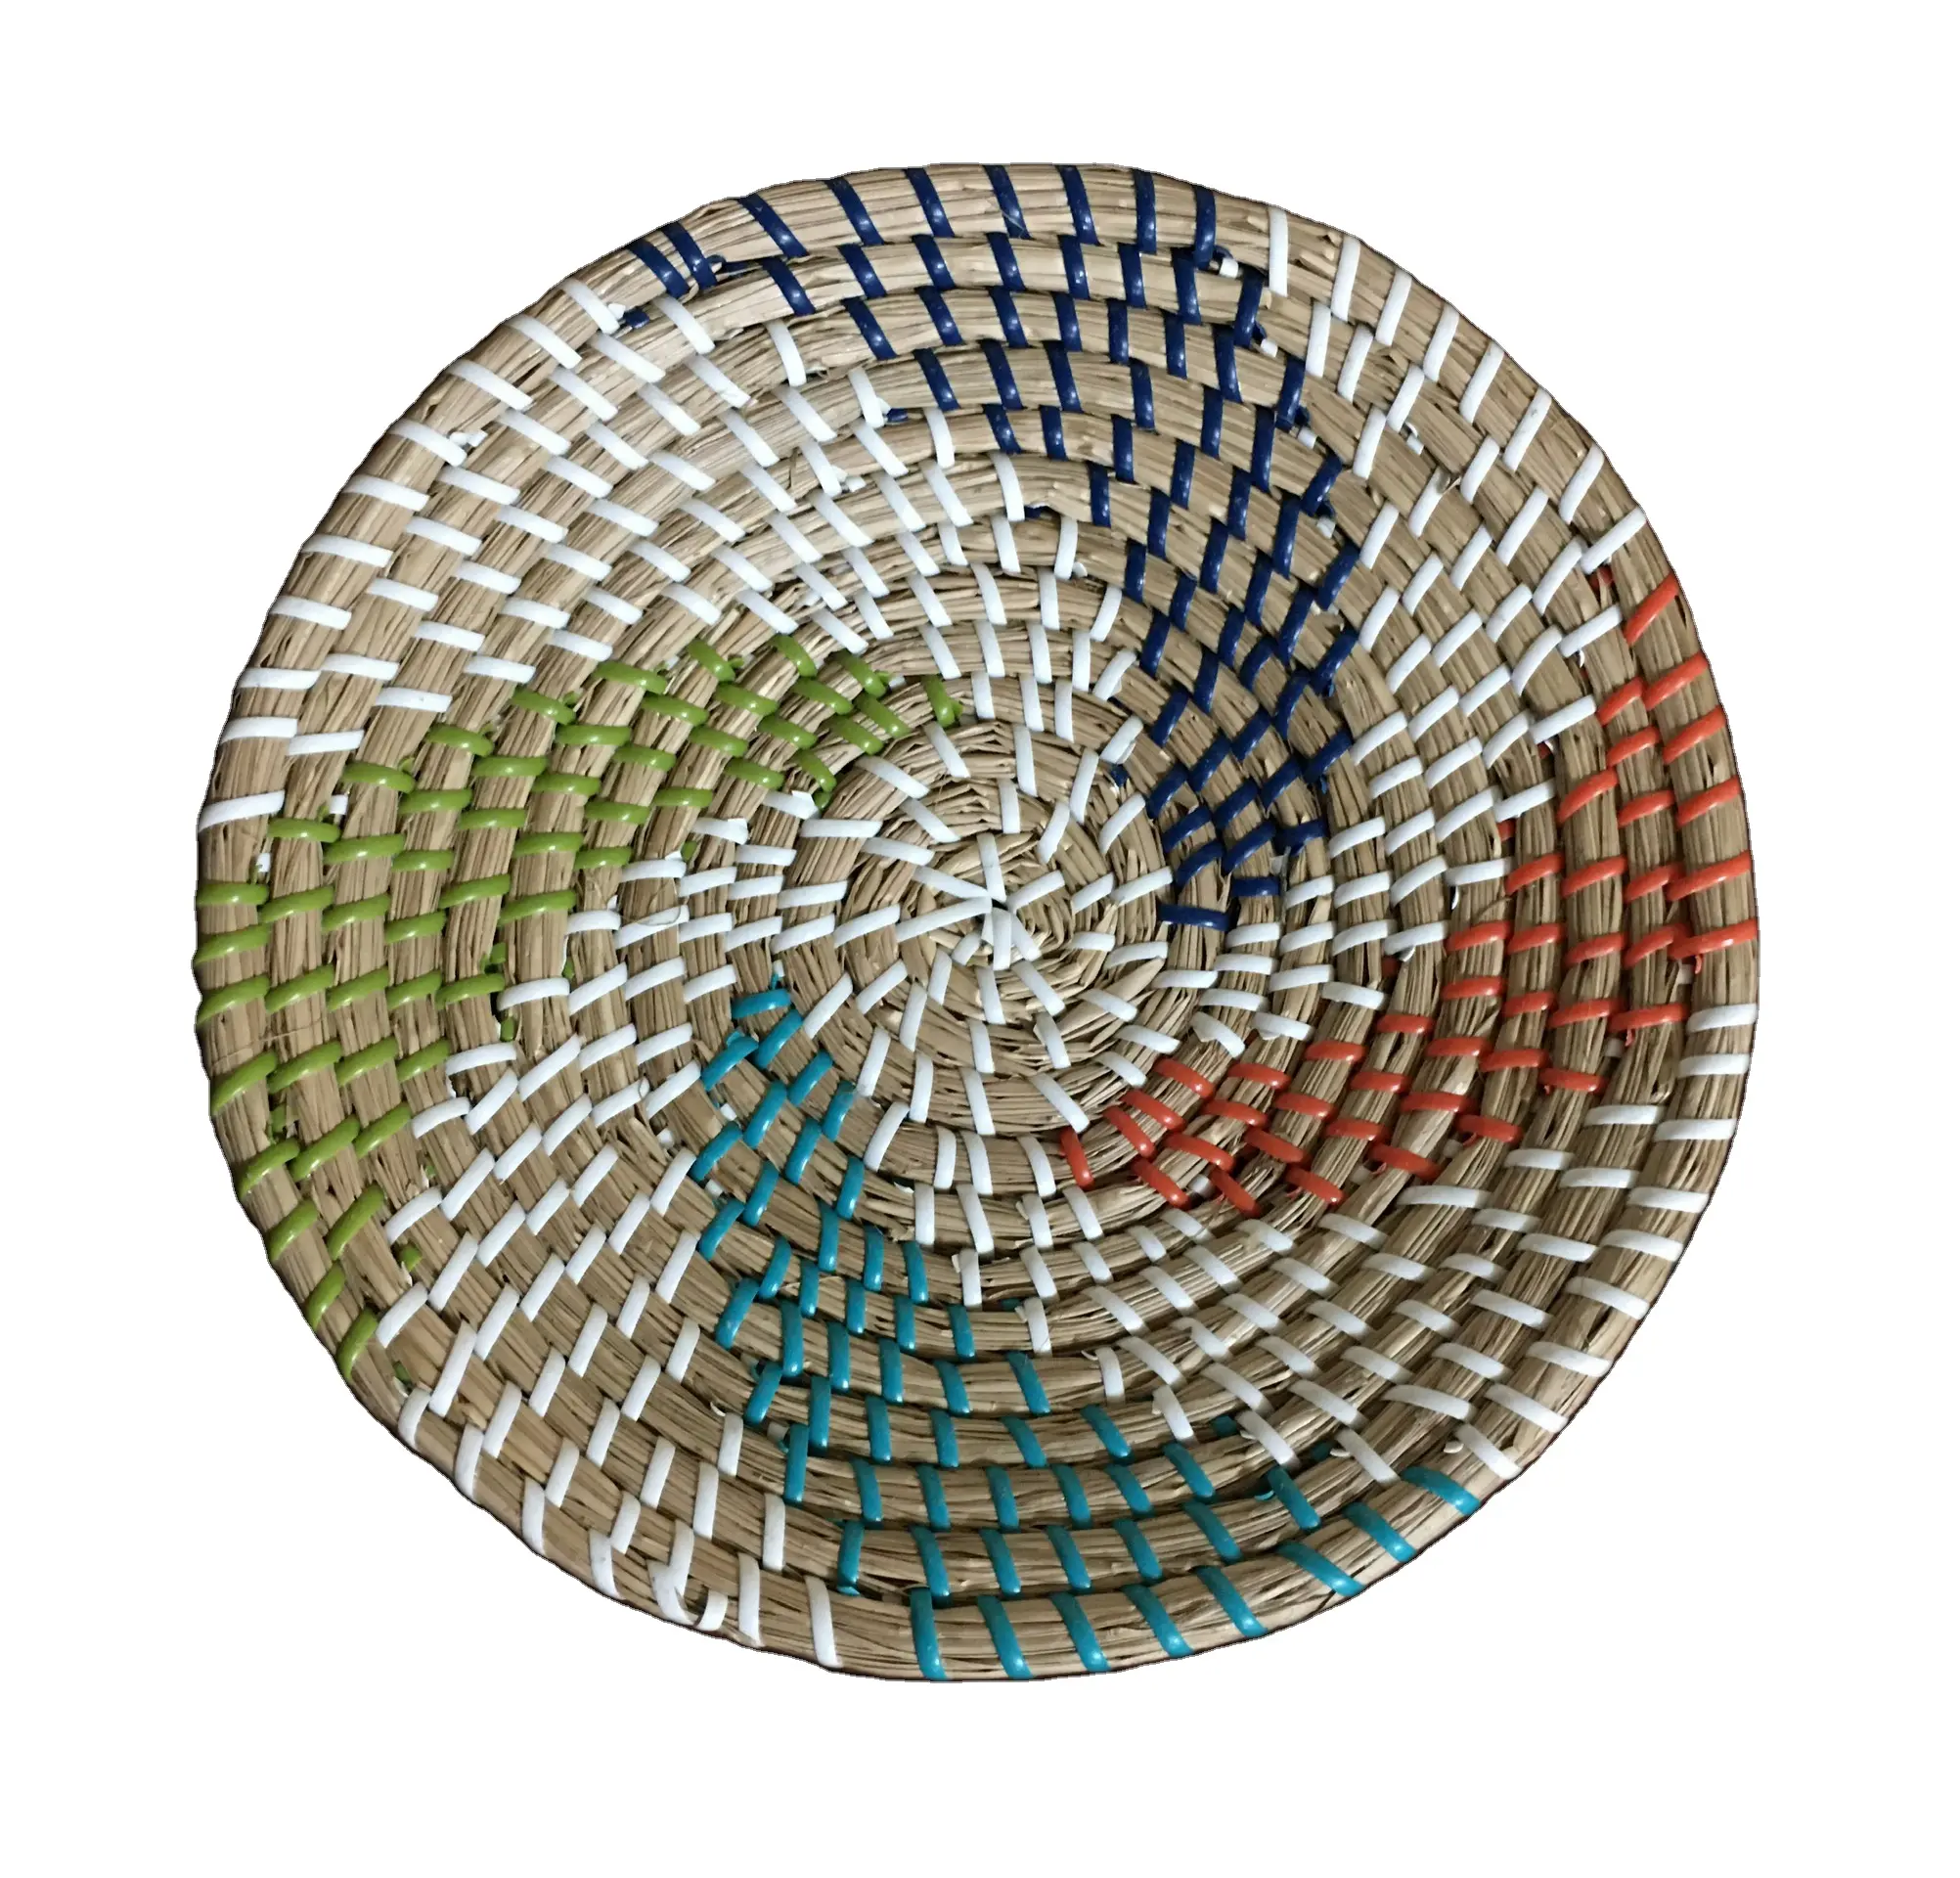 Seagrass Basket Wall Decor With Pin Wheel Pattern